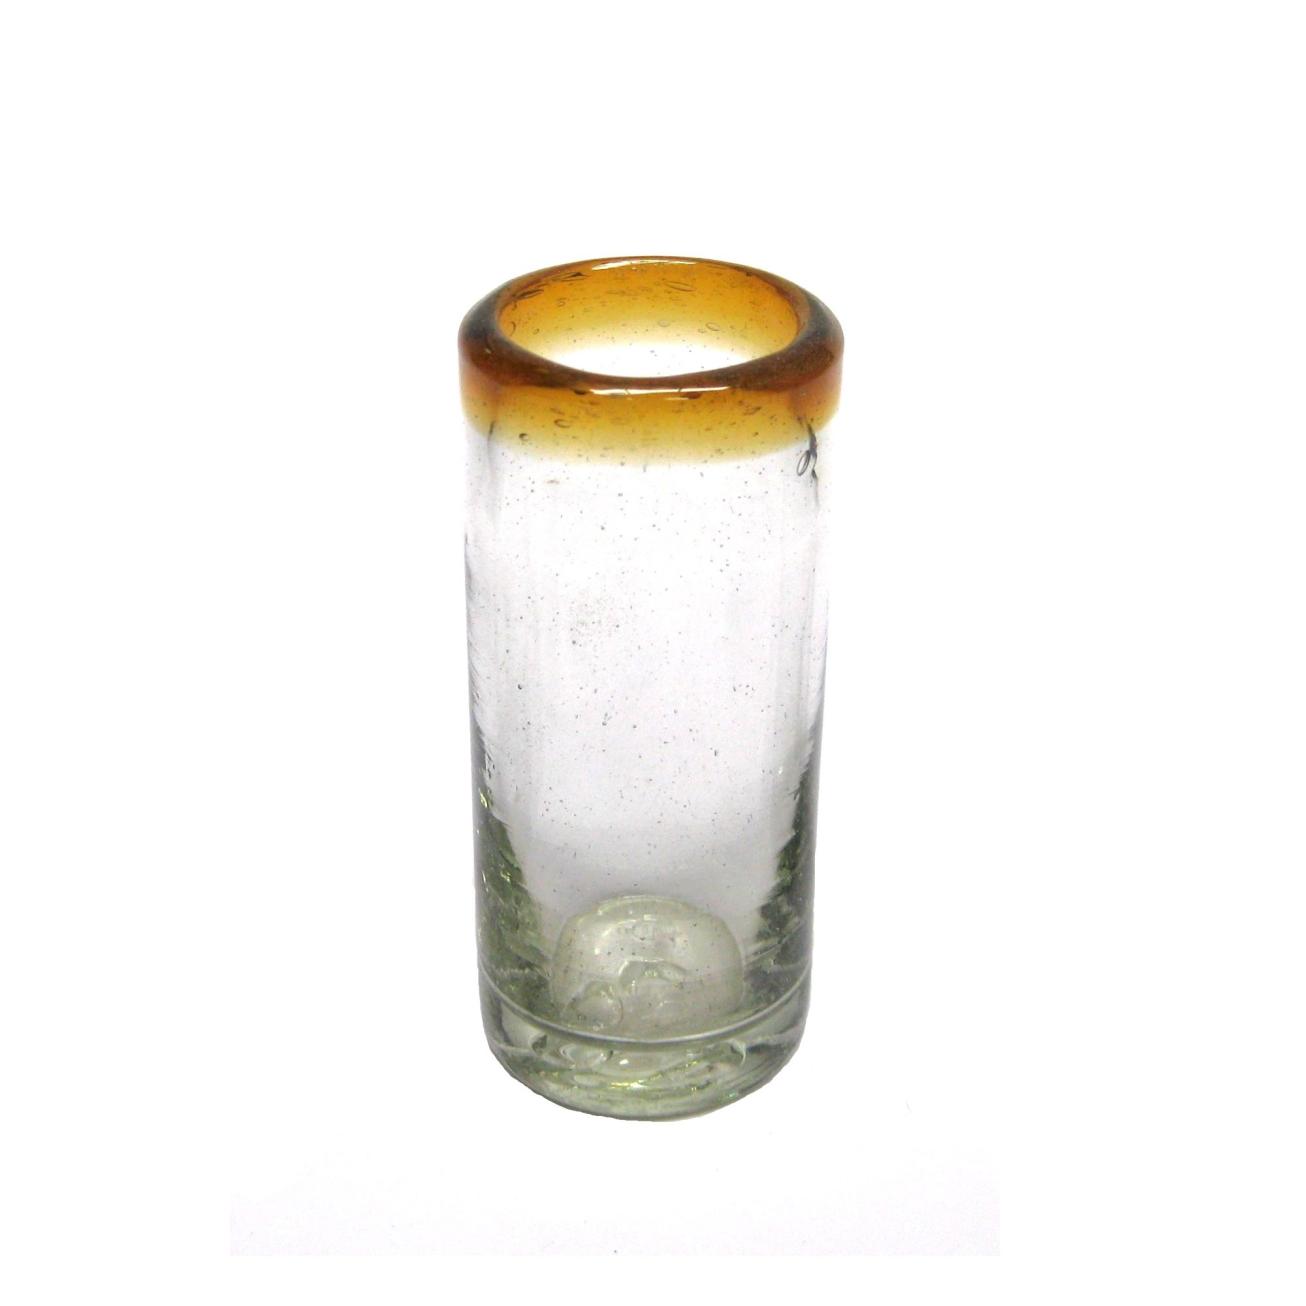 MEXICAN GLASSWARE / Amber Rim 2 oz Tequila Shot Glasses (set of 6) / These shot glasses bordered in amber color are perfect for sipping your favourite tequila or any other liquor.